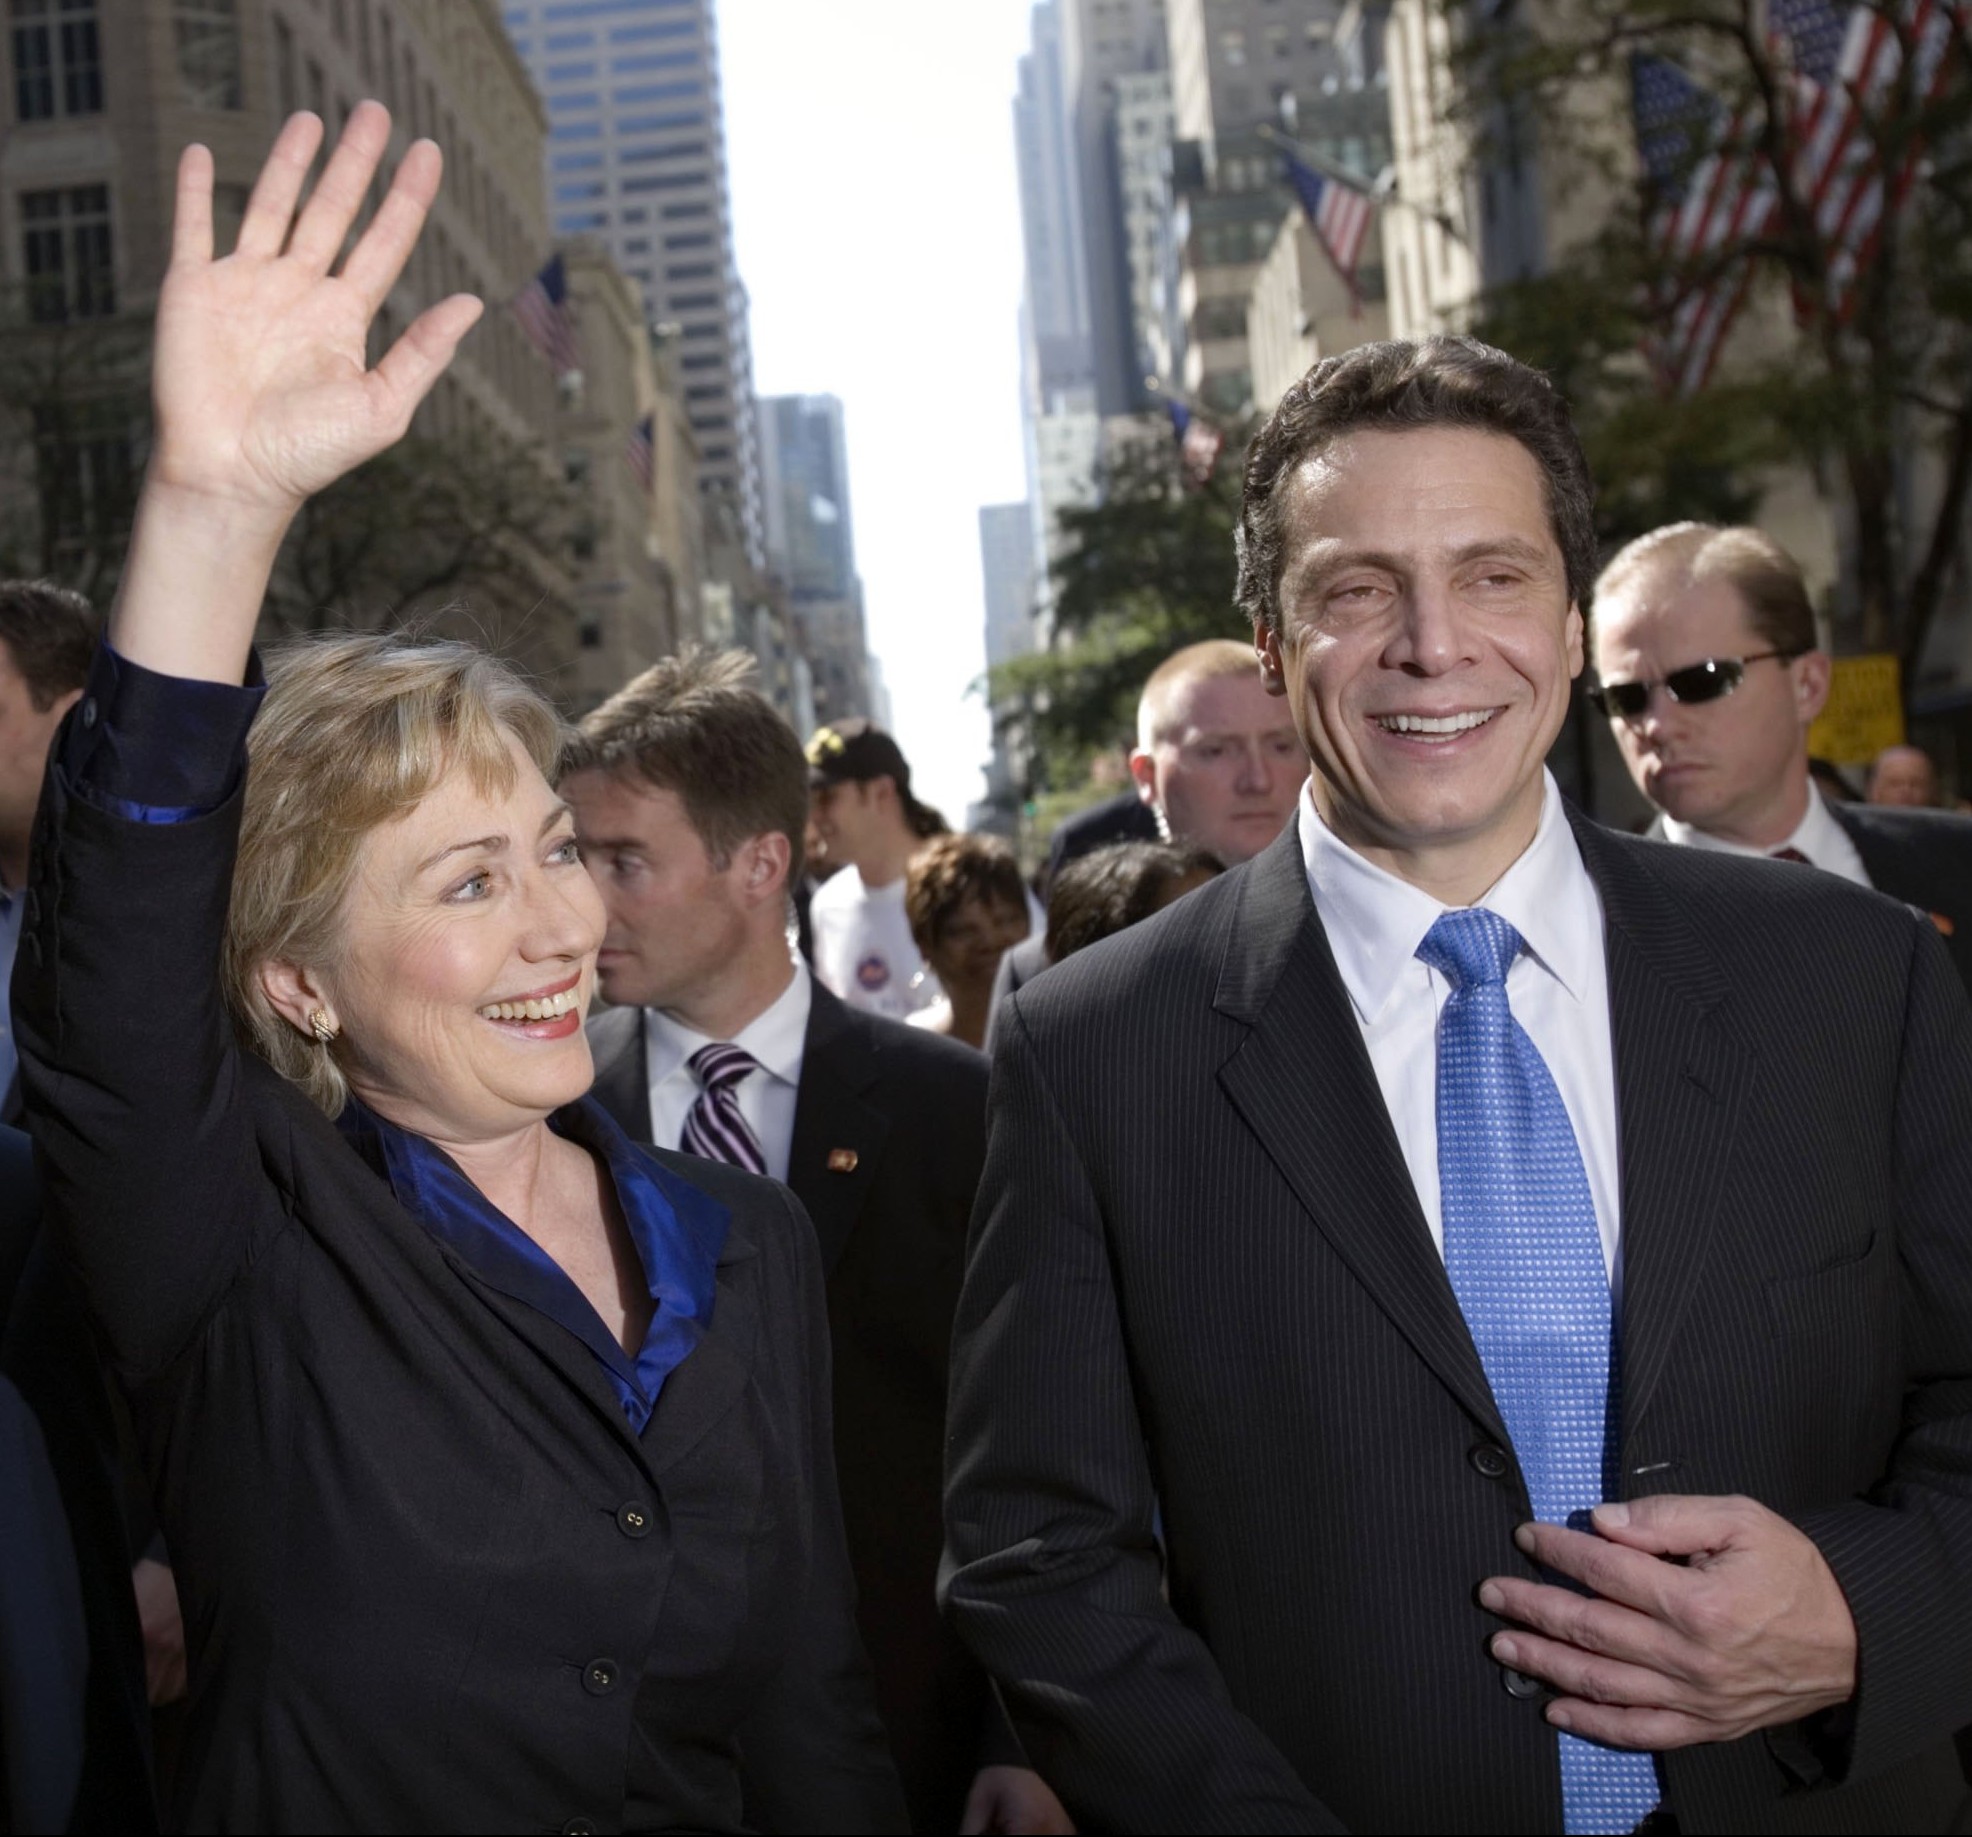 Hillary Clinton and Andrew Cuomo at the Columbus Day Parade in 2006 (Photo: Getty Images).